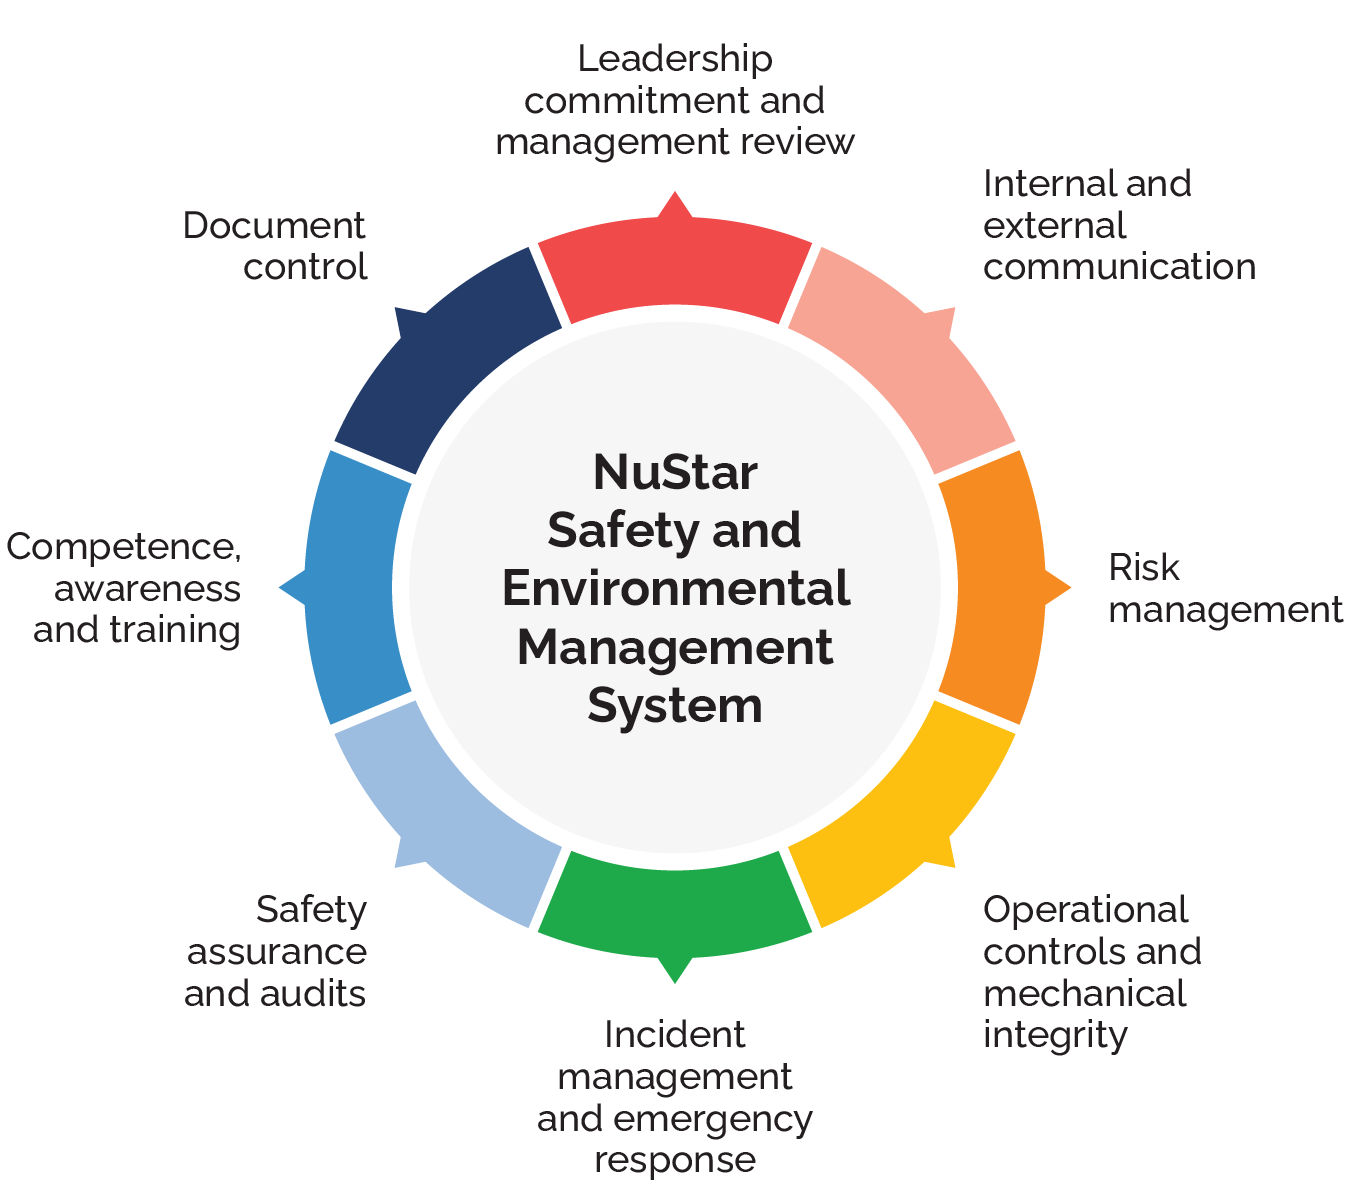 Circular organization of the review and management systems in place at NuStar to promote Health, Safety and Environmental excellence at NuStar.